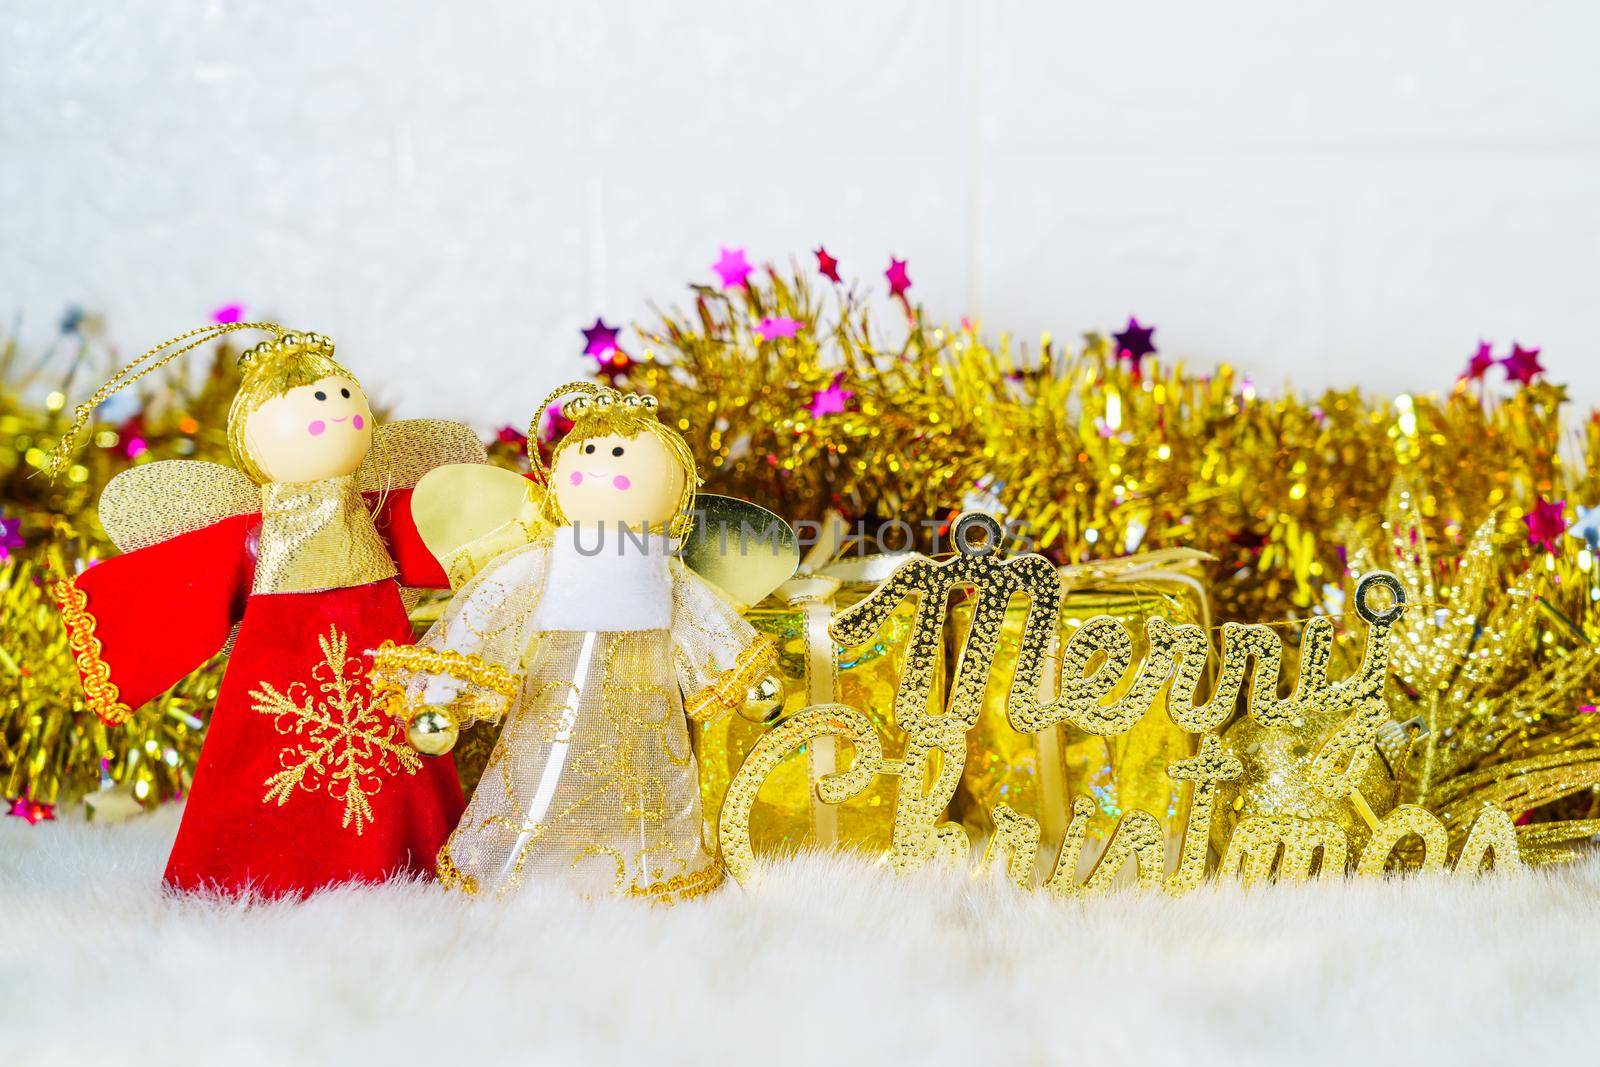 Chrismas doll with Christmas ornaments and decorations